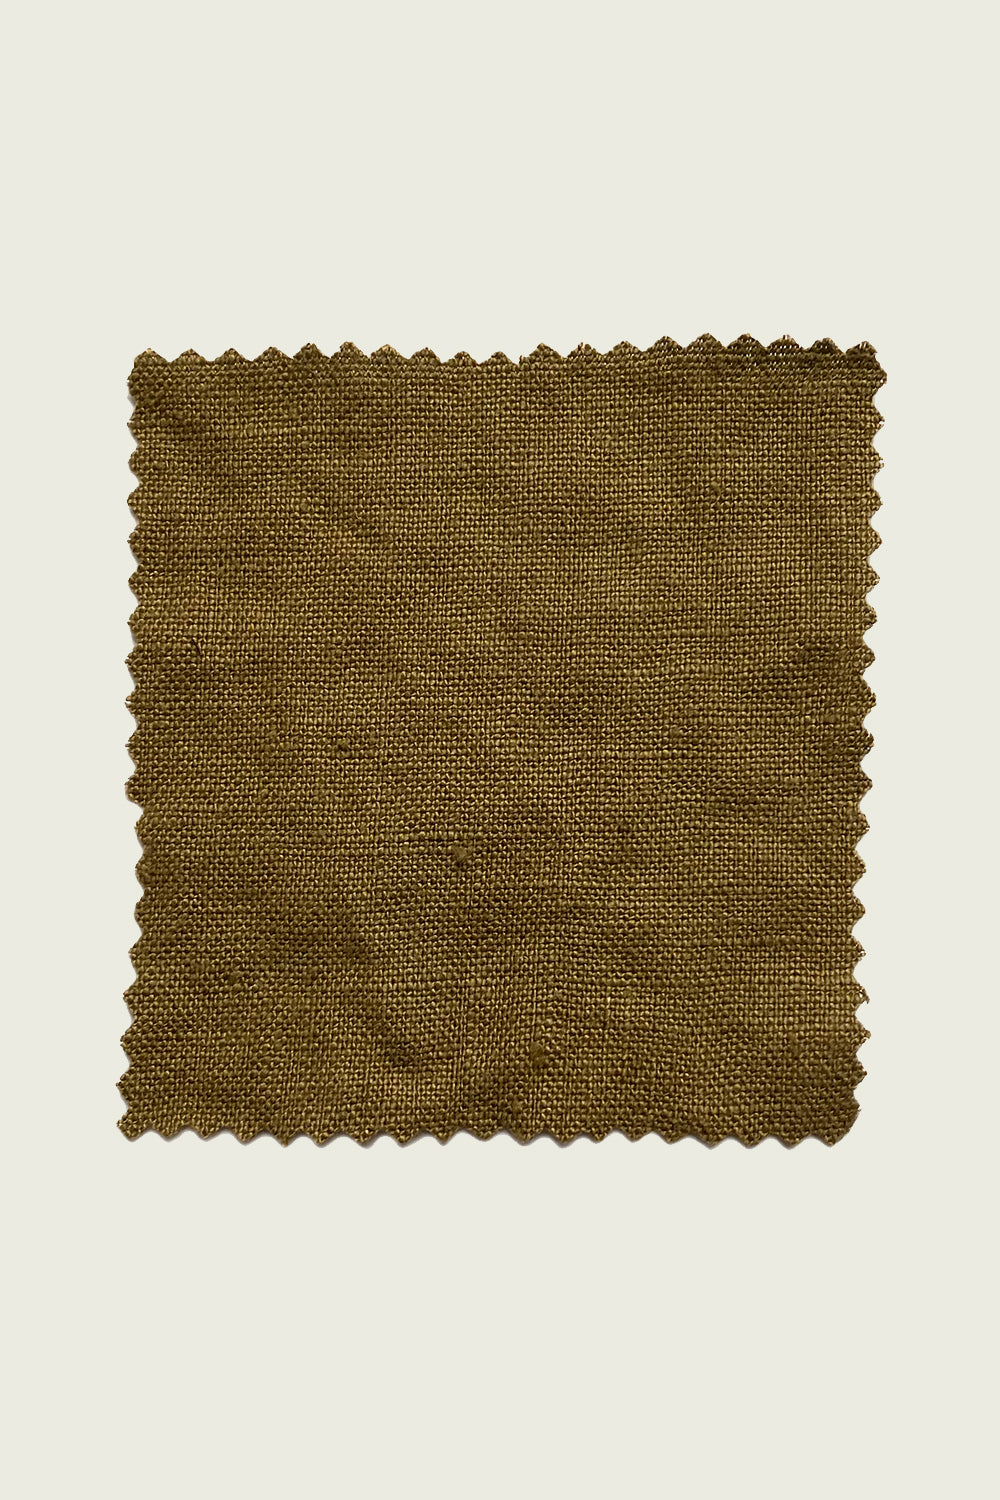 Midweight Linen | Olive by the Yard